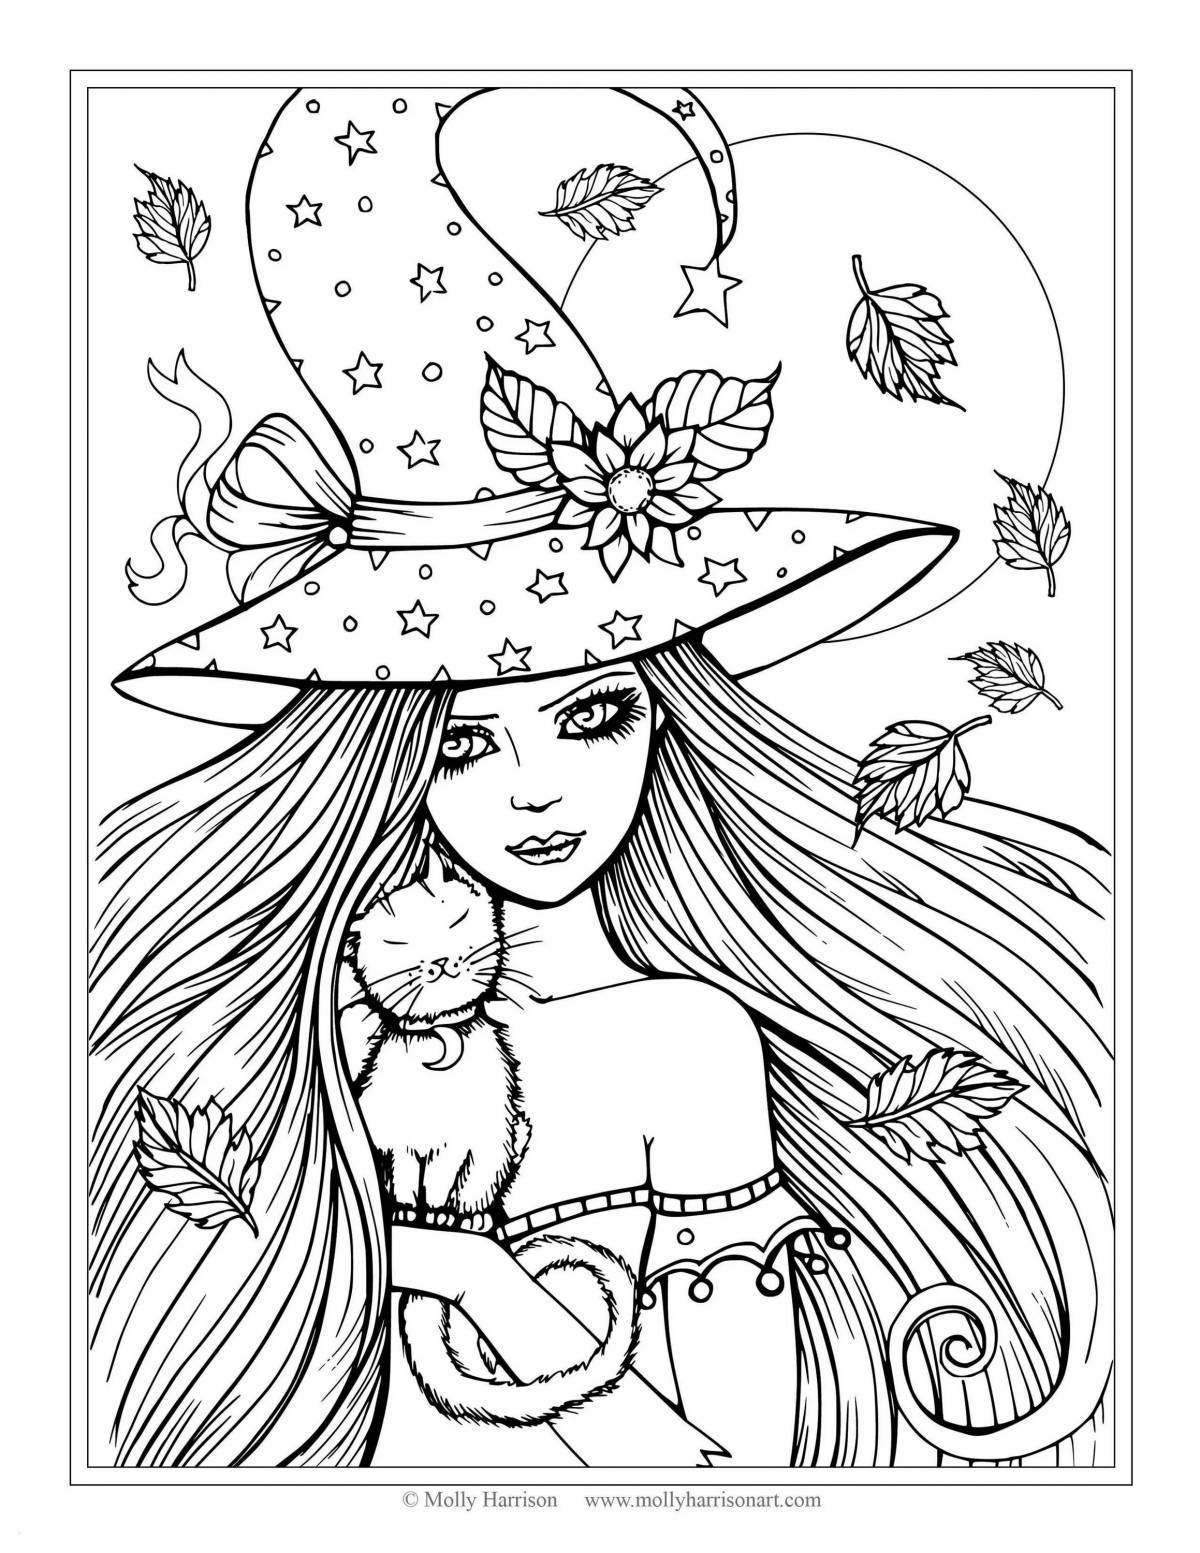 Great coloring book for girls 12 years old